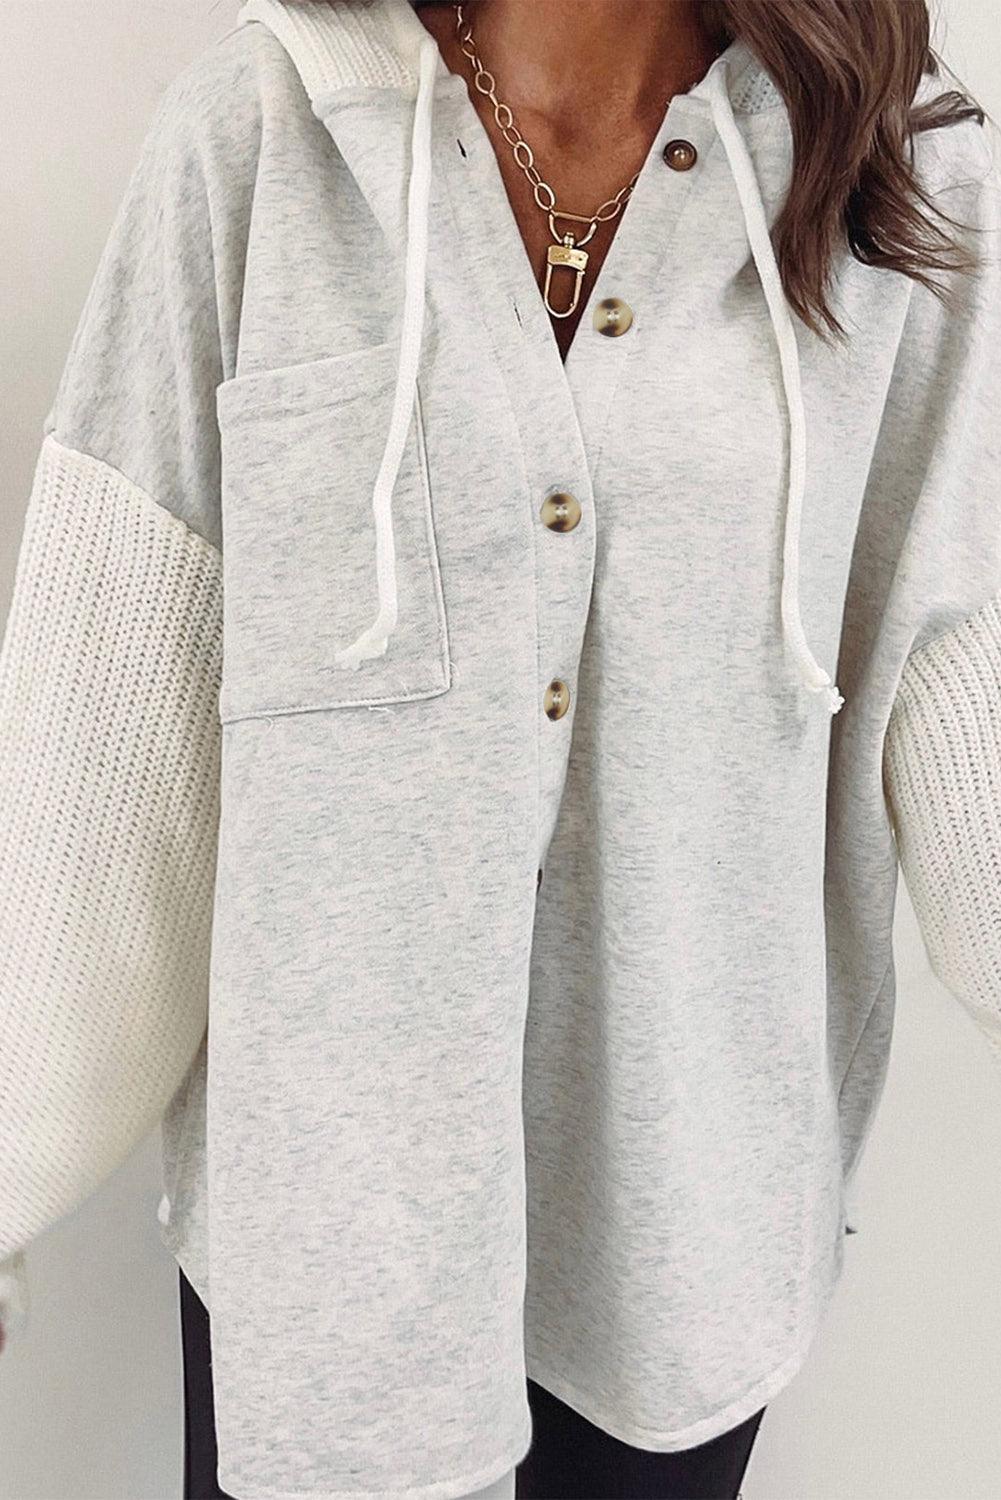 Gray Button Up Contrast Knitted Sleeves Hooded Jacket - Vesteeto